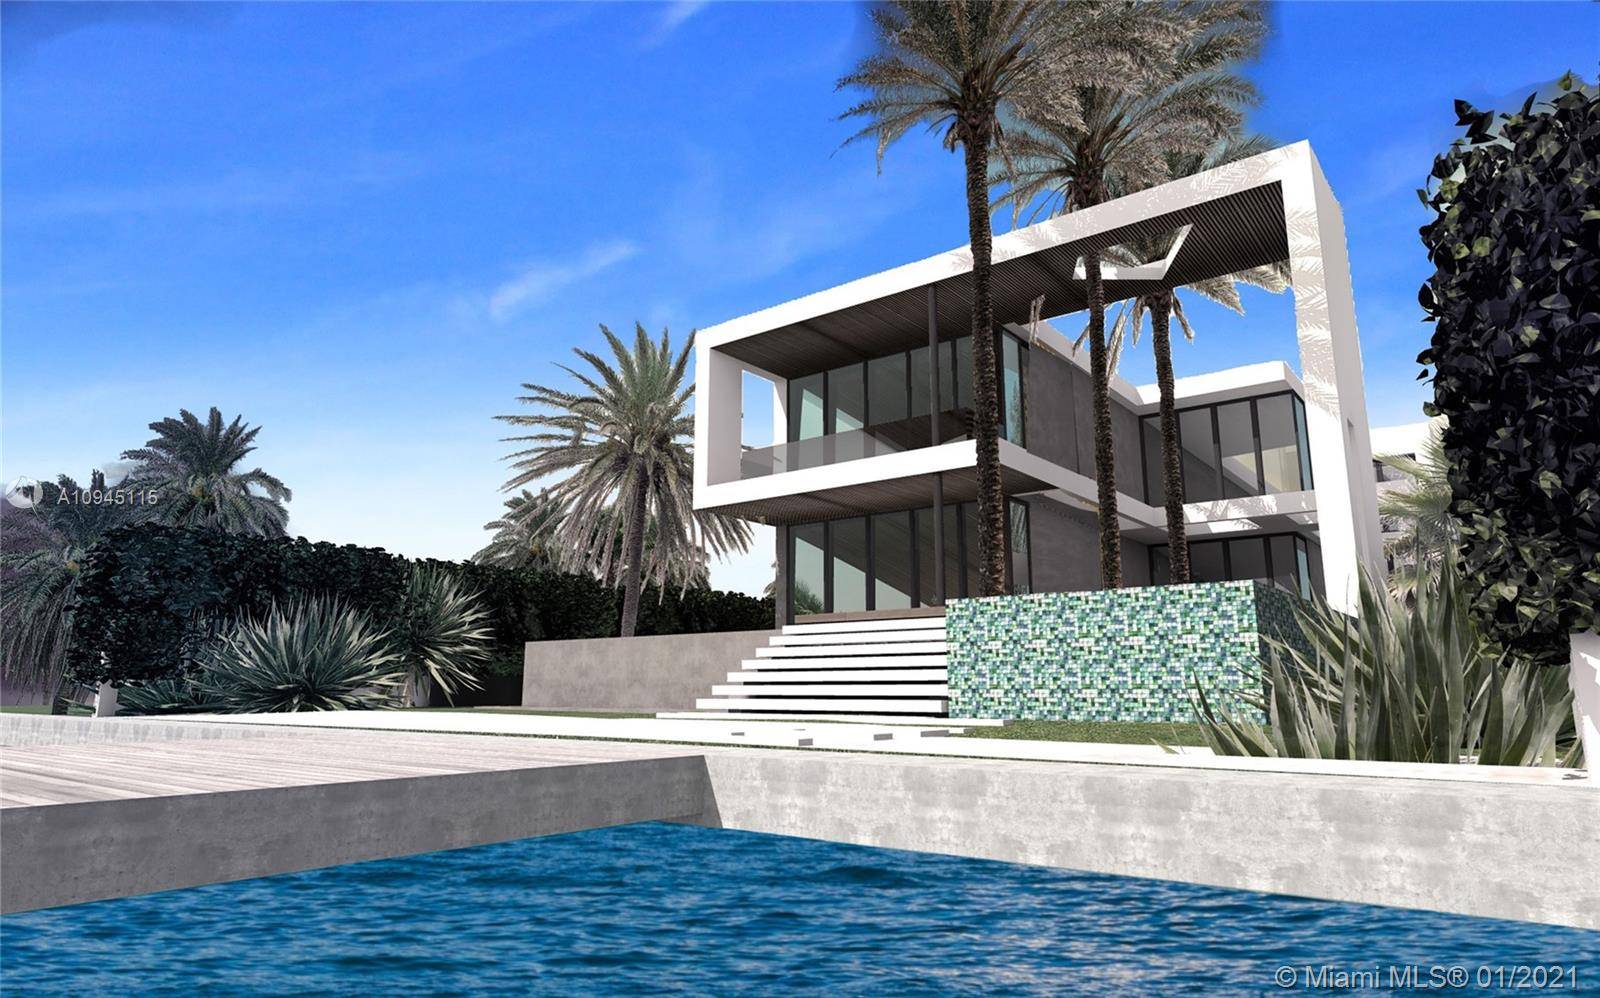 TOGU DESIGN SABAL DEVELOPMENT UNLEASH ANOTHER NEWLY BUILT MODERN WATERFRONT MASTERPIECE IN HIBISCUS ISLAND SITTING DIRECTLY ON THE OPEN BAY !